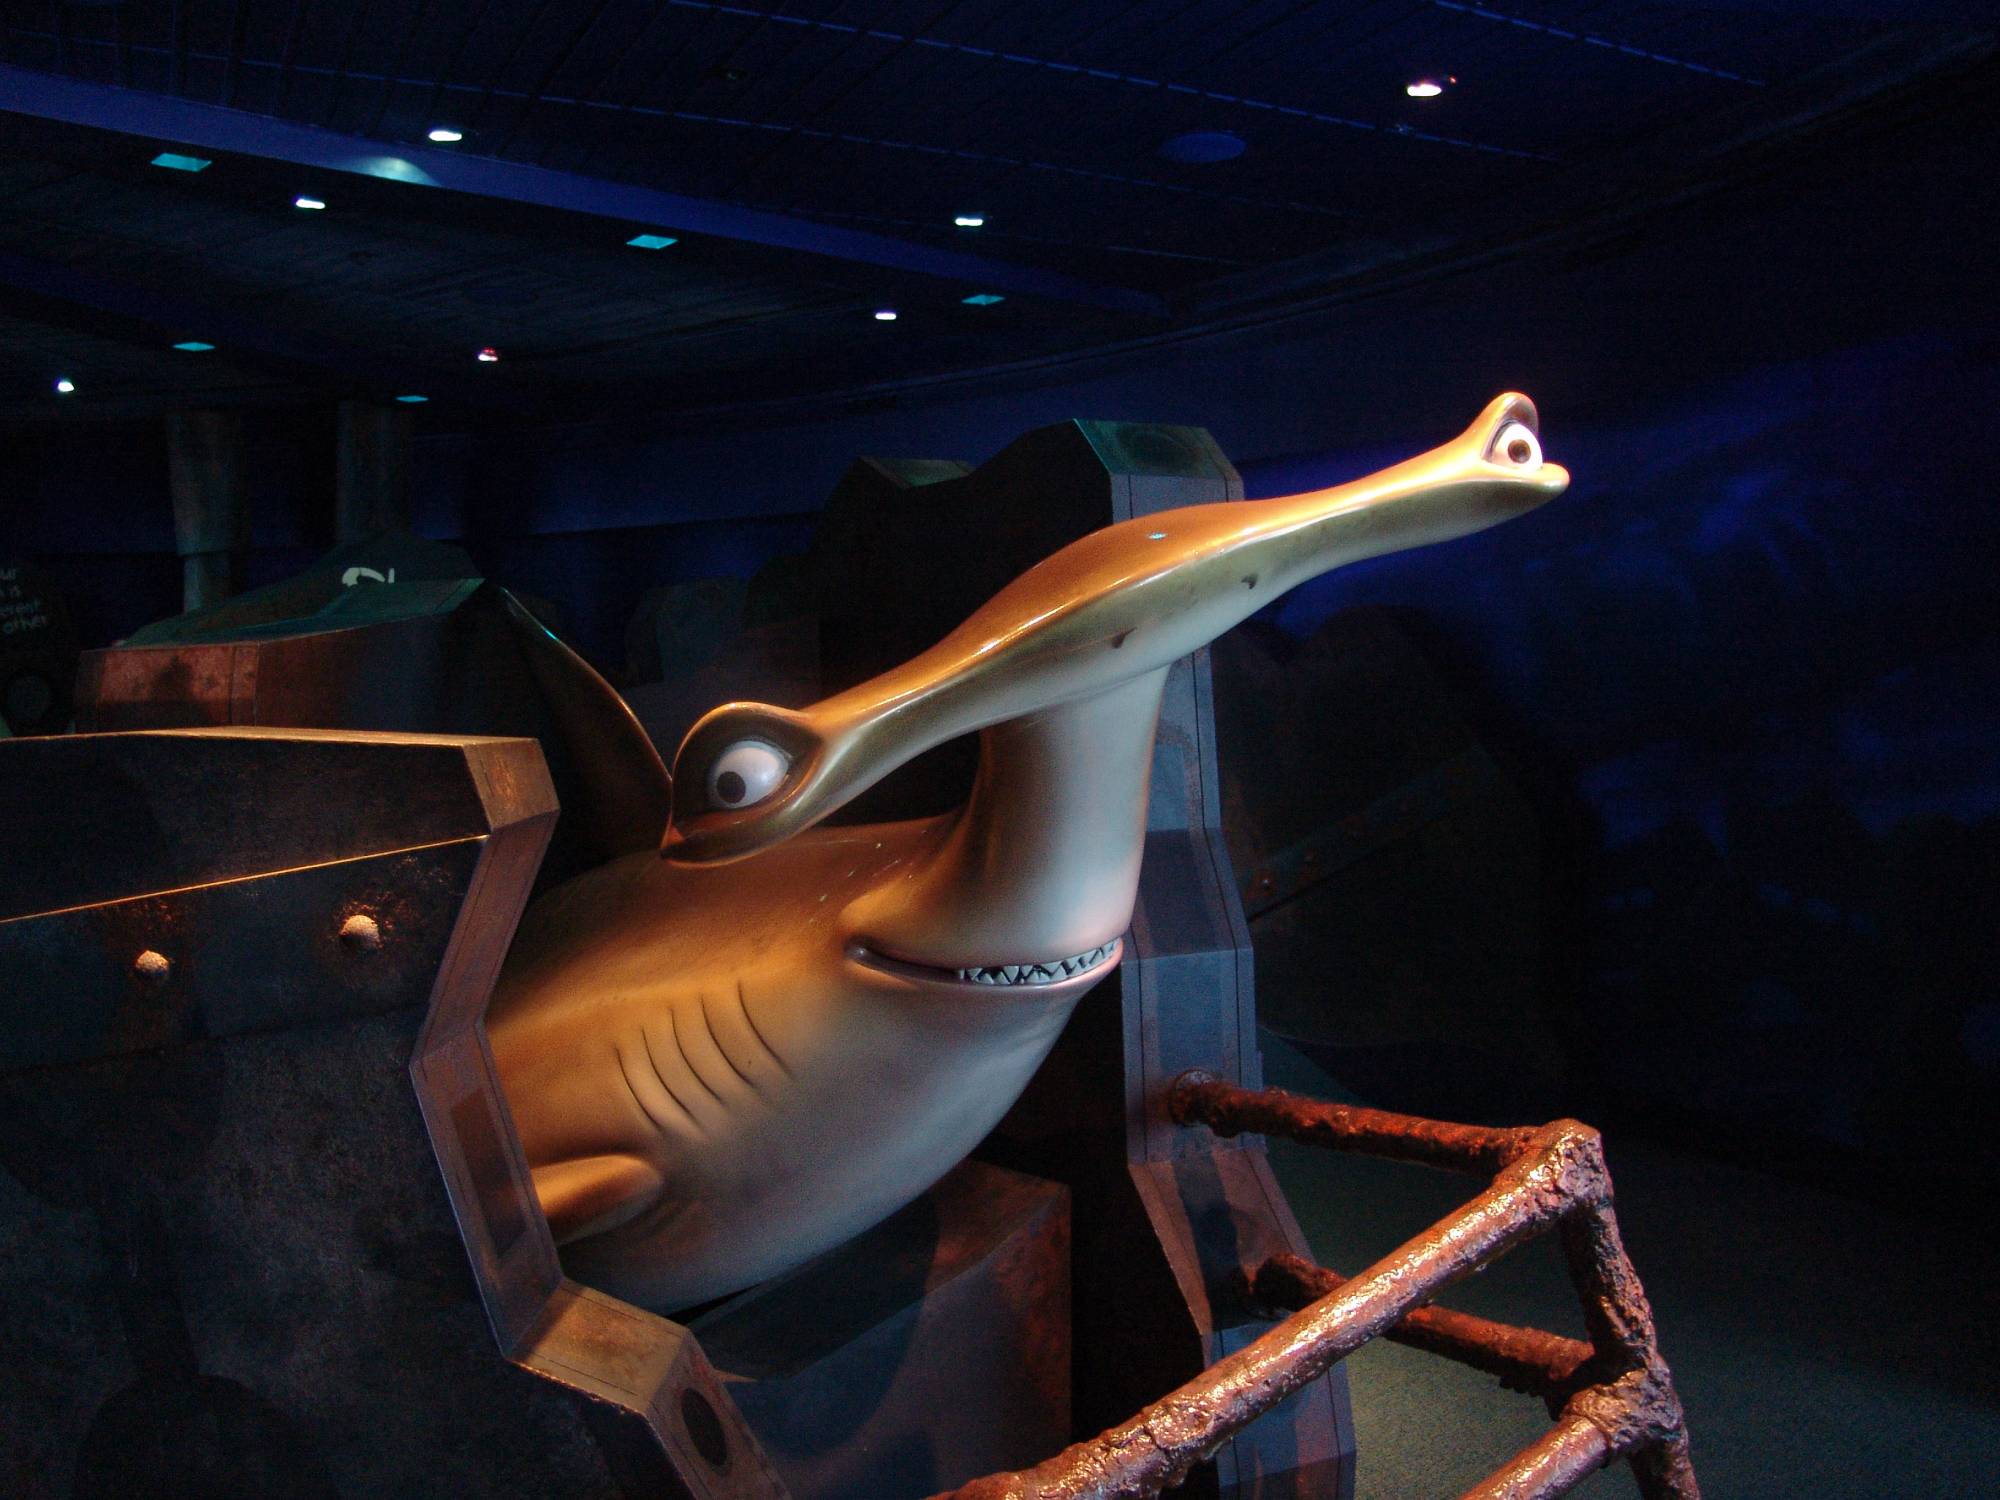 Epcot - Seas with Nemo and Friends